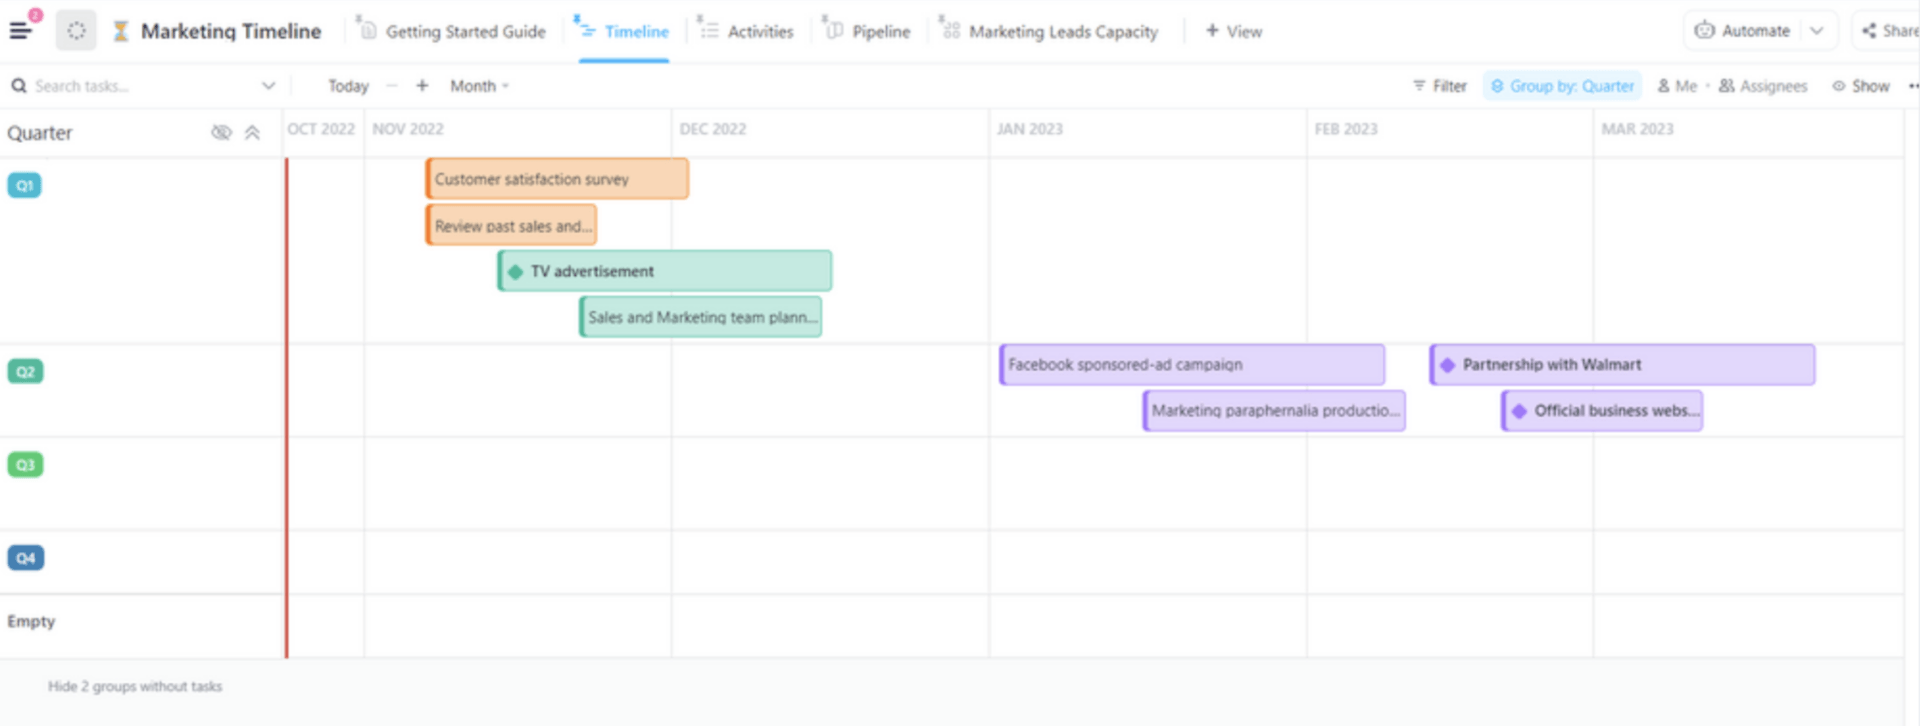 Outline project tasks and major milestones on a Gantt chart in ClickUp